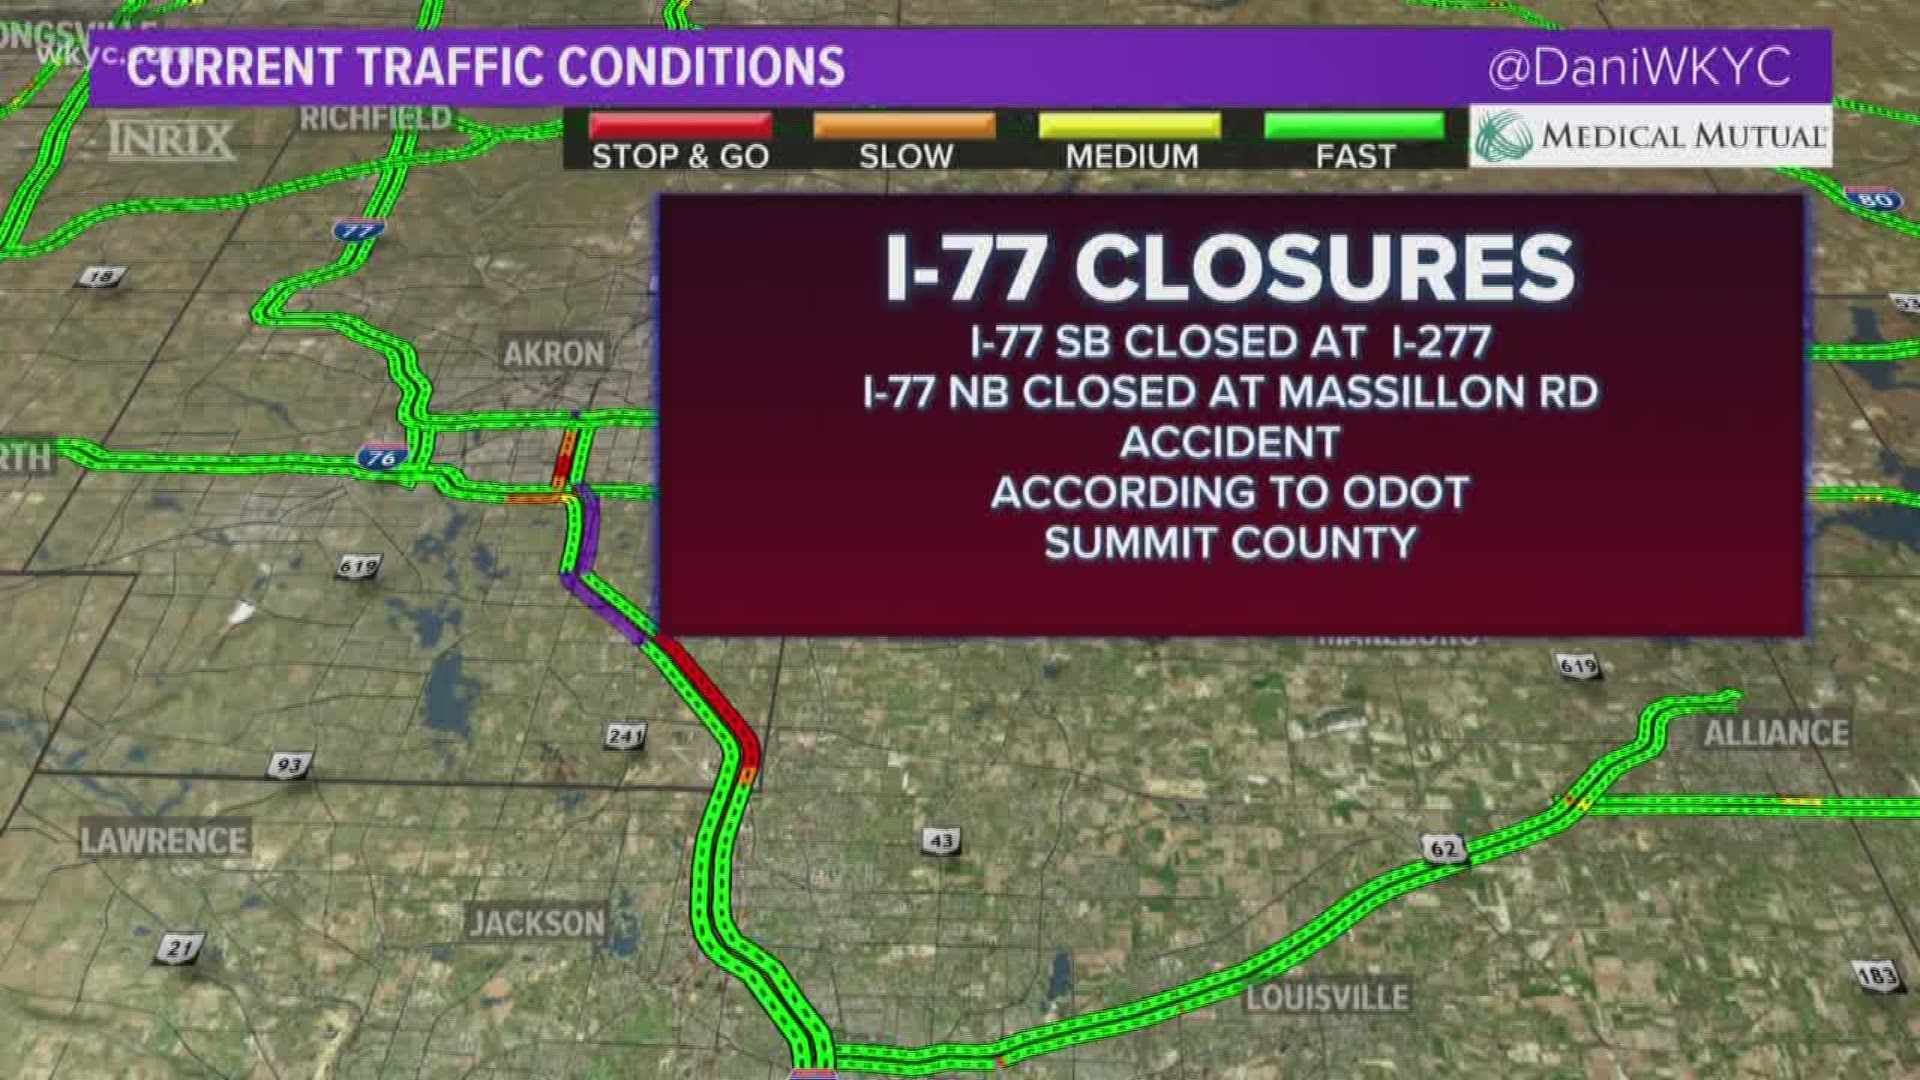 Nov. 22, 2019: Drivers are dealing with an unexpected detour this morning after a crash caused the closure of I-77 in southern Summit County.